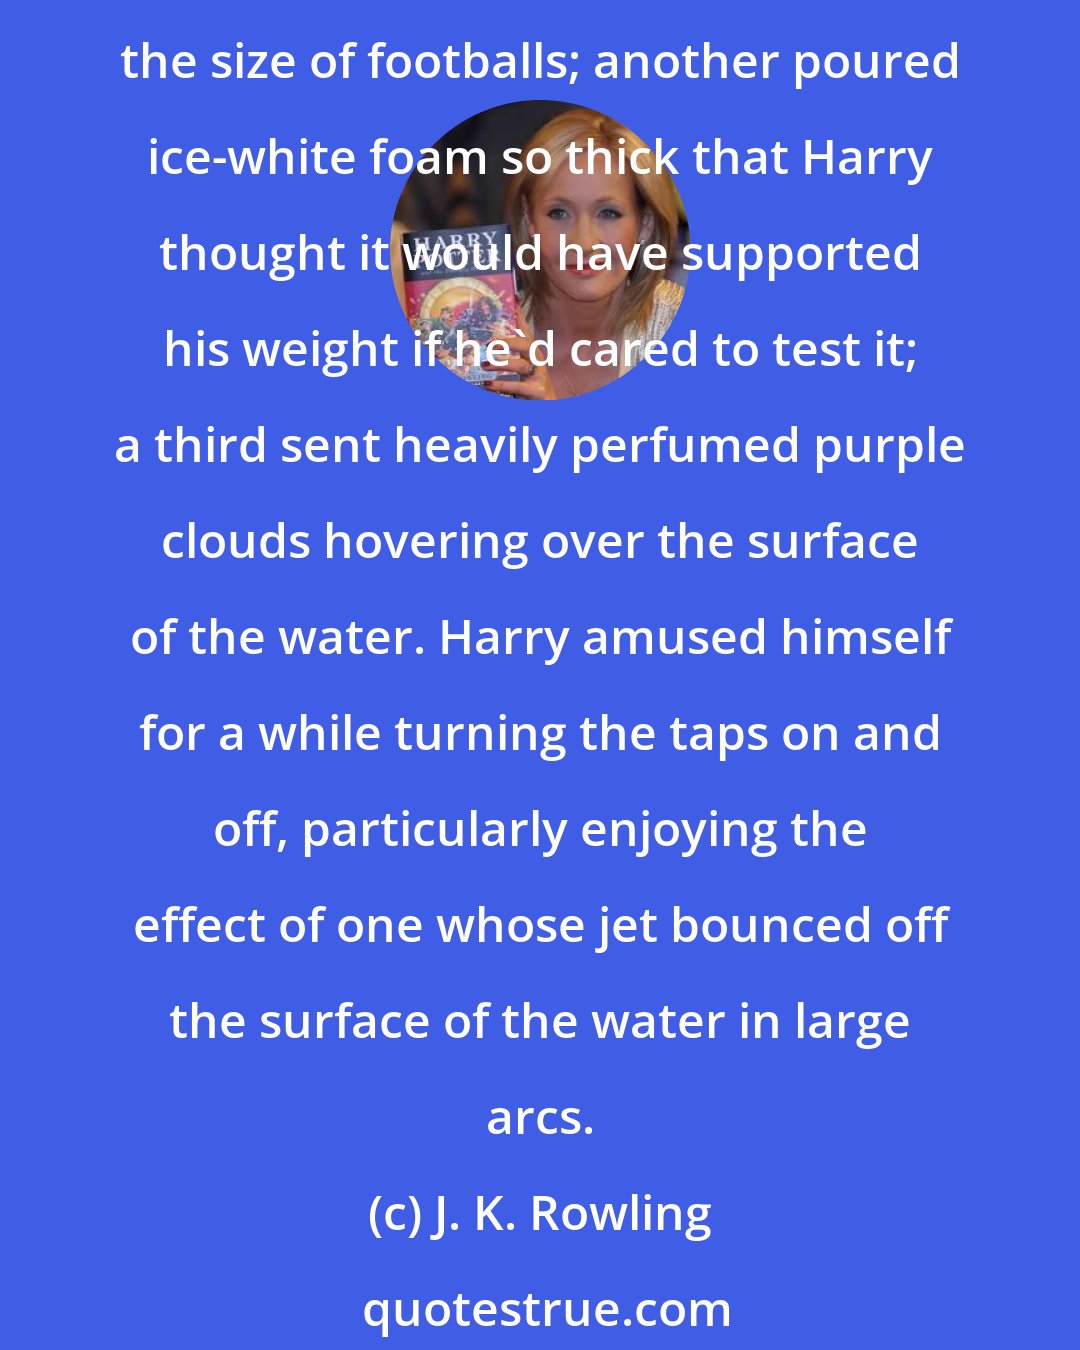 J. K. Rowling: He could tell at once that they carried different sorts of bubble bath mixed with the water though it wasn't bubble bath as Harry had ever experienced. One tap gushed pink and blue bubbles the size of footballs; another poured ice-white foam so thick that Harry thought it would have supported his weight if he'd cared to test it; a third sent heavily perfumed purple clouds hovering over the surface of the water. Harry amused himself for a while turning the taps on and off, particularly enjoying the effect of one whose jet bounced off the surface of the water in large arcs.